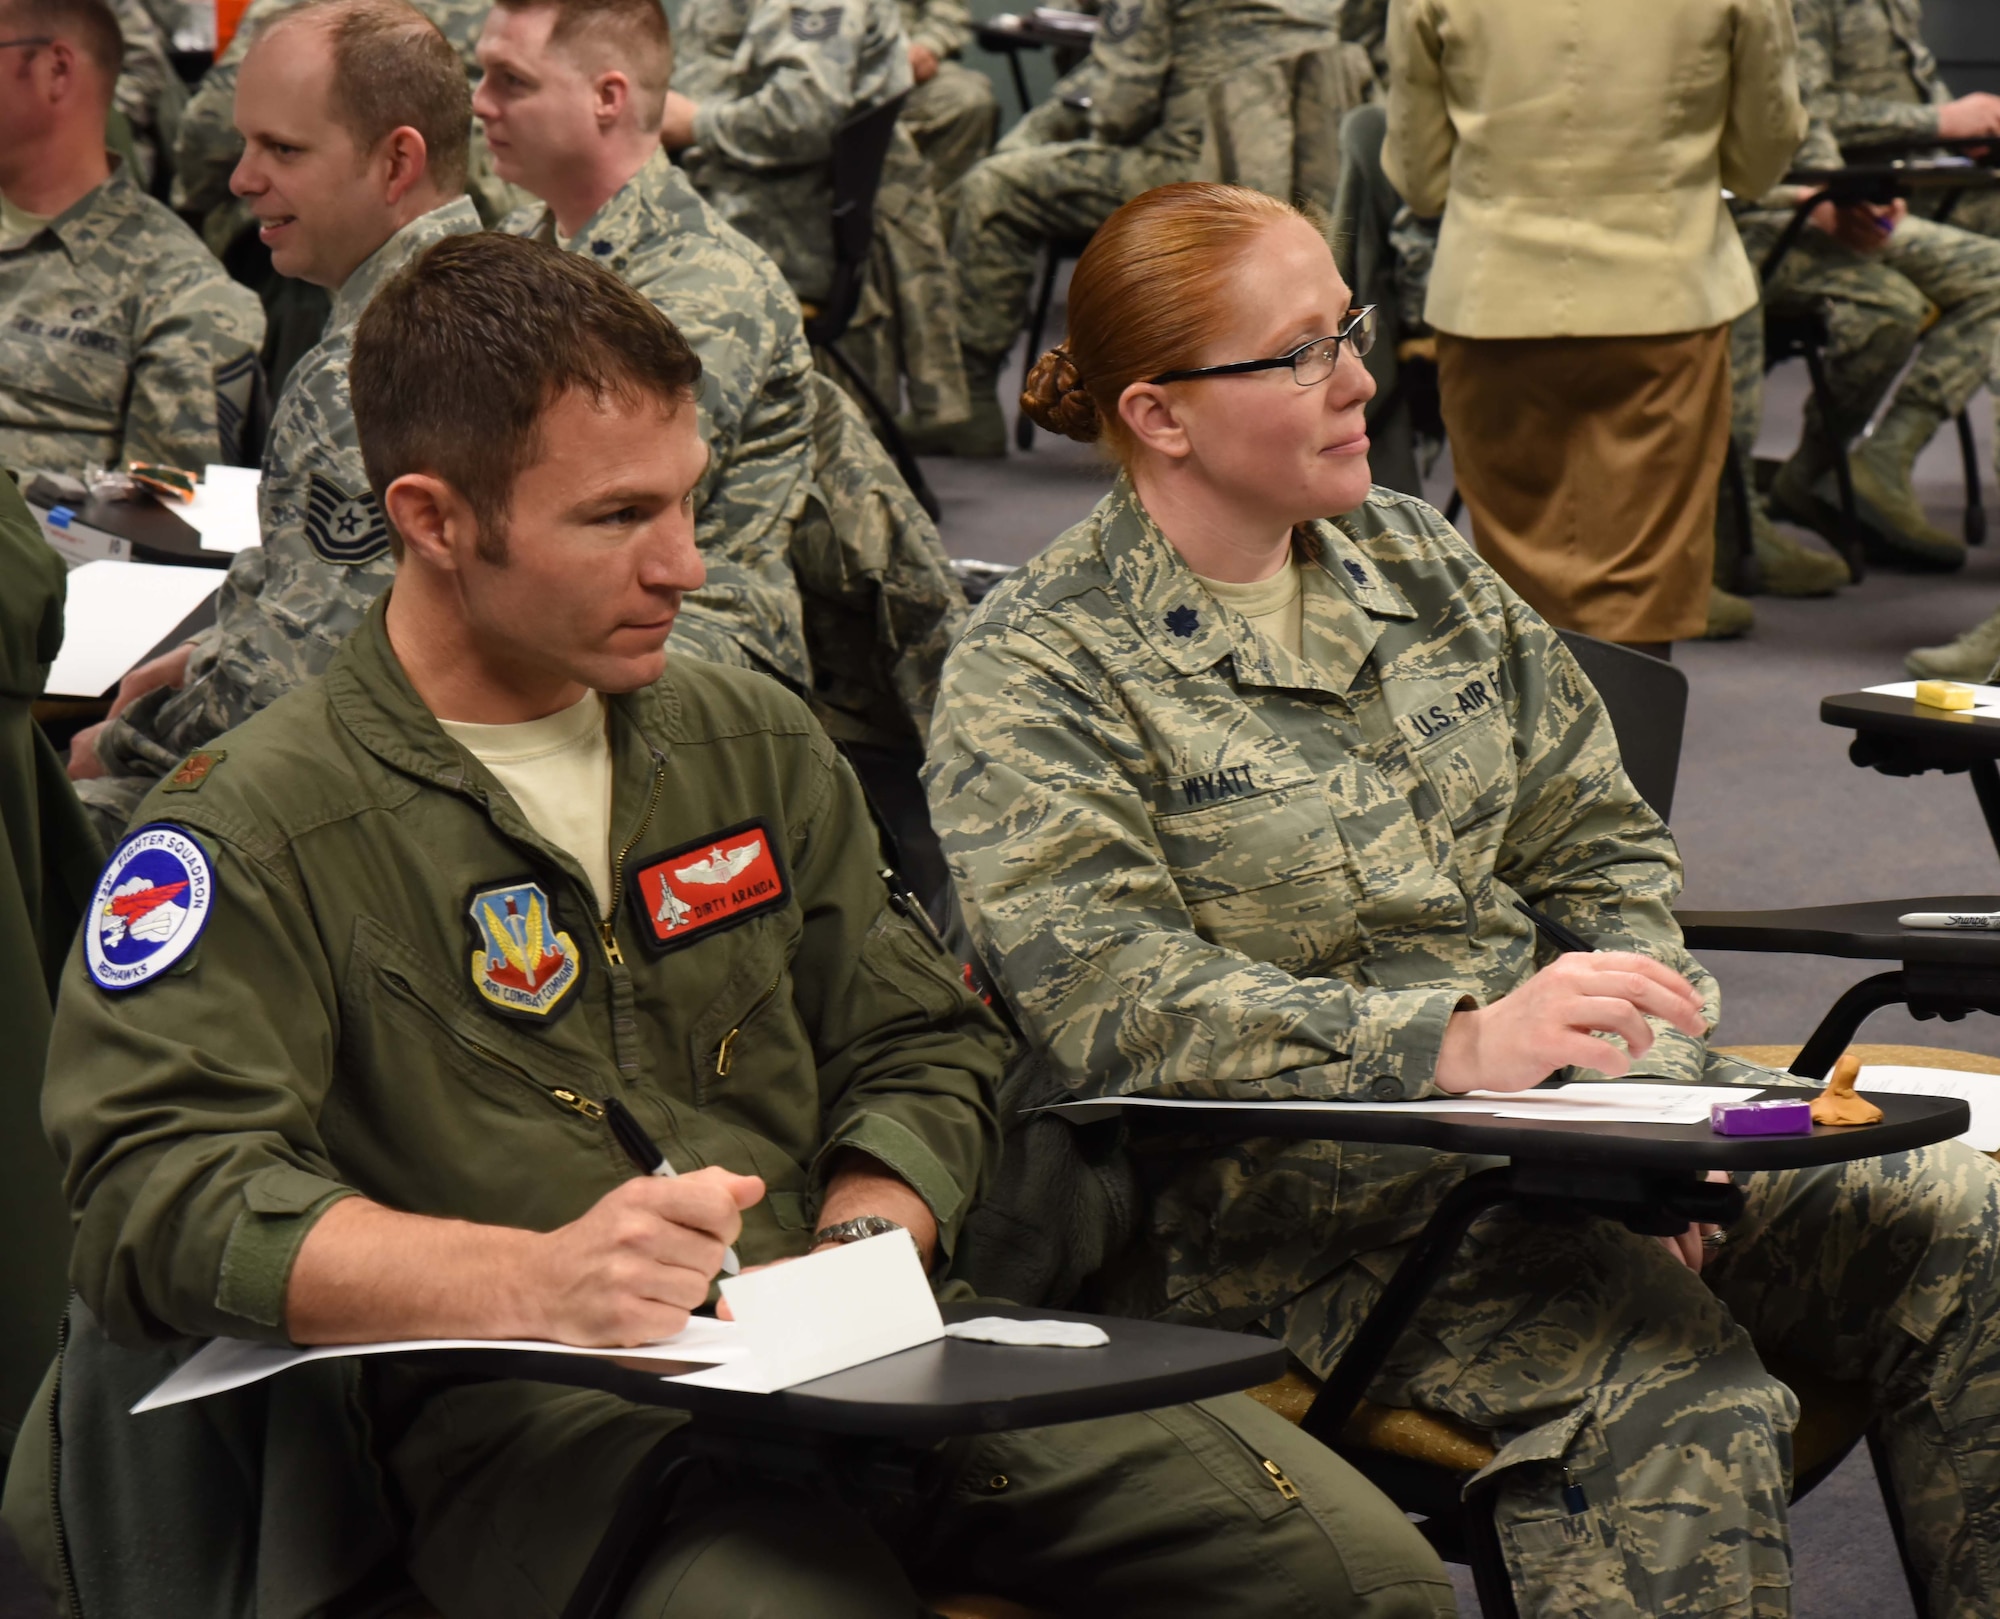 Members of the 142nd Fighter Wing, Oregon Air National Guard, take part in a focus group orchestrated by the Air Force Chief of Staff to help give feedback on various areas to promote best practices and identify improvements, Portland Air National Guard Base, Ore. April 1, 2017. (U.S. Air National Guard photo by Tech. Sgt. Aaron Perkins, 142nd Fighter Wing Public Affairs)